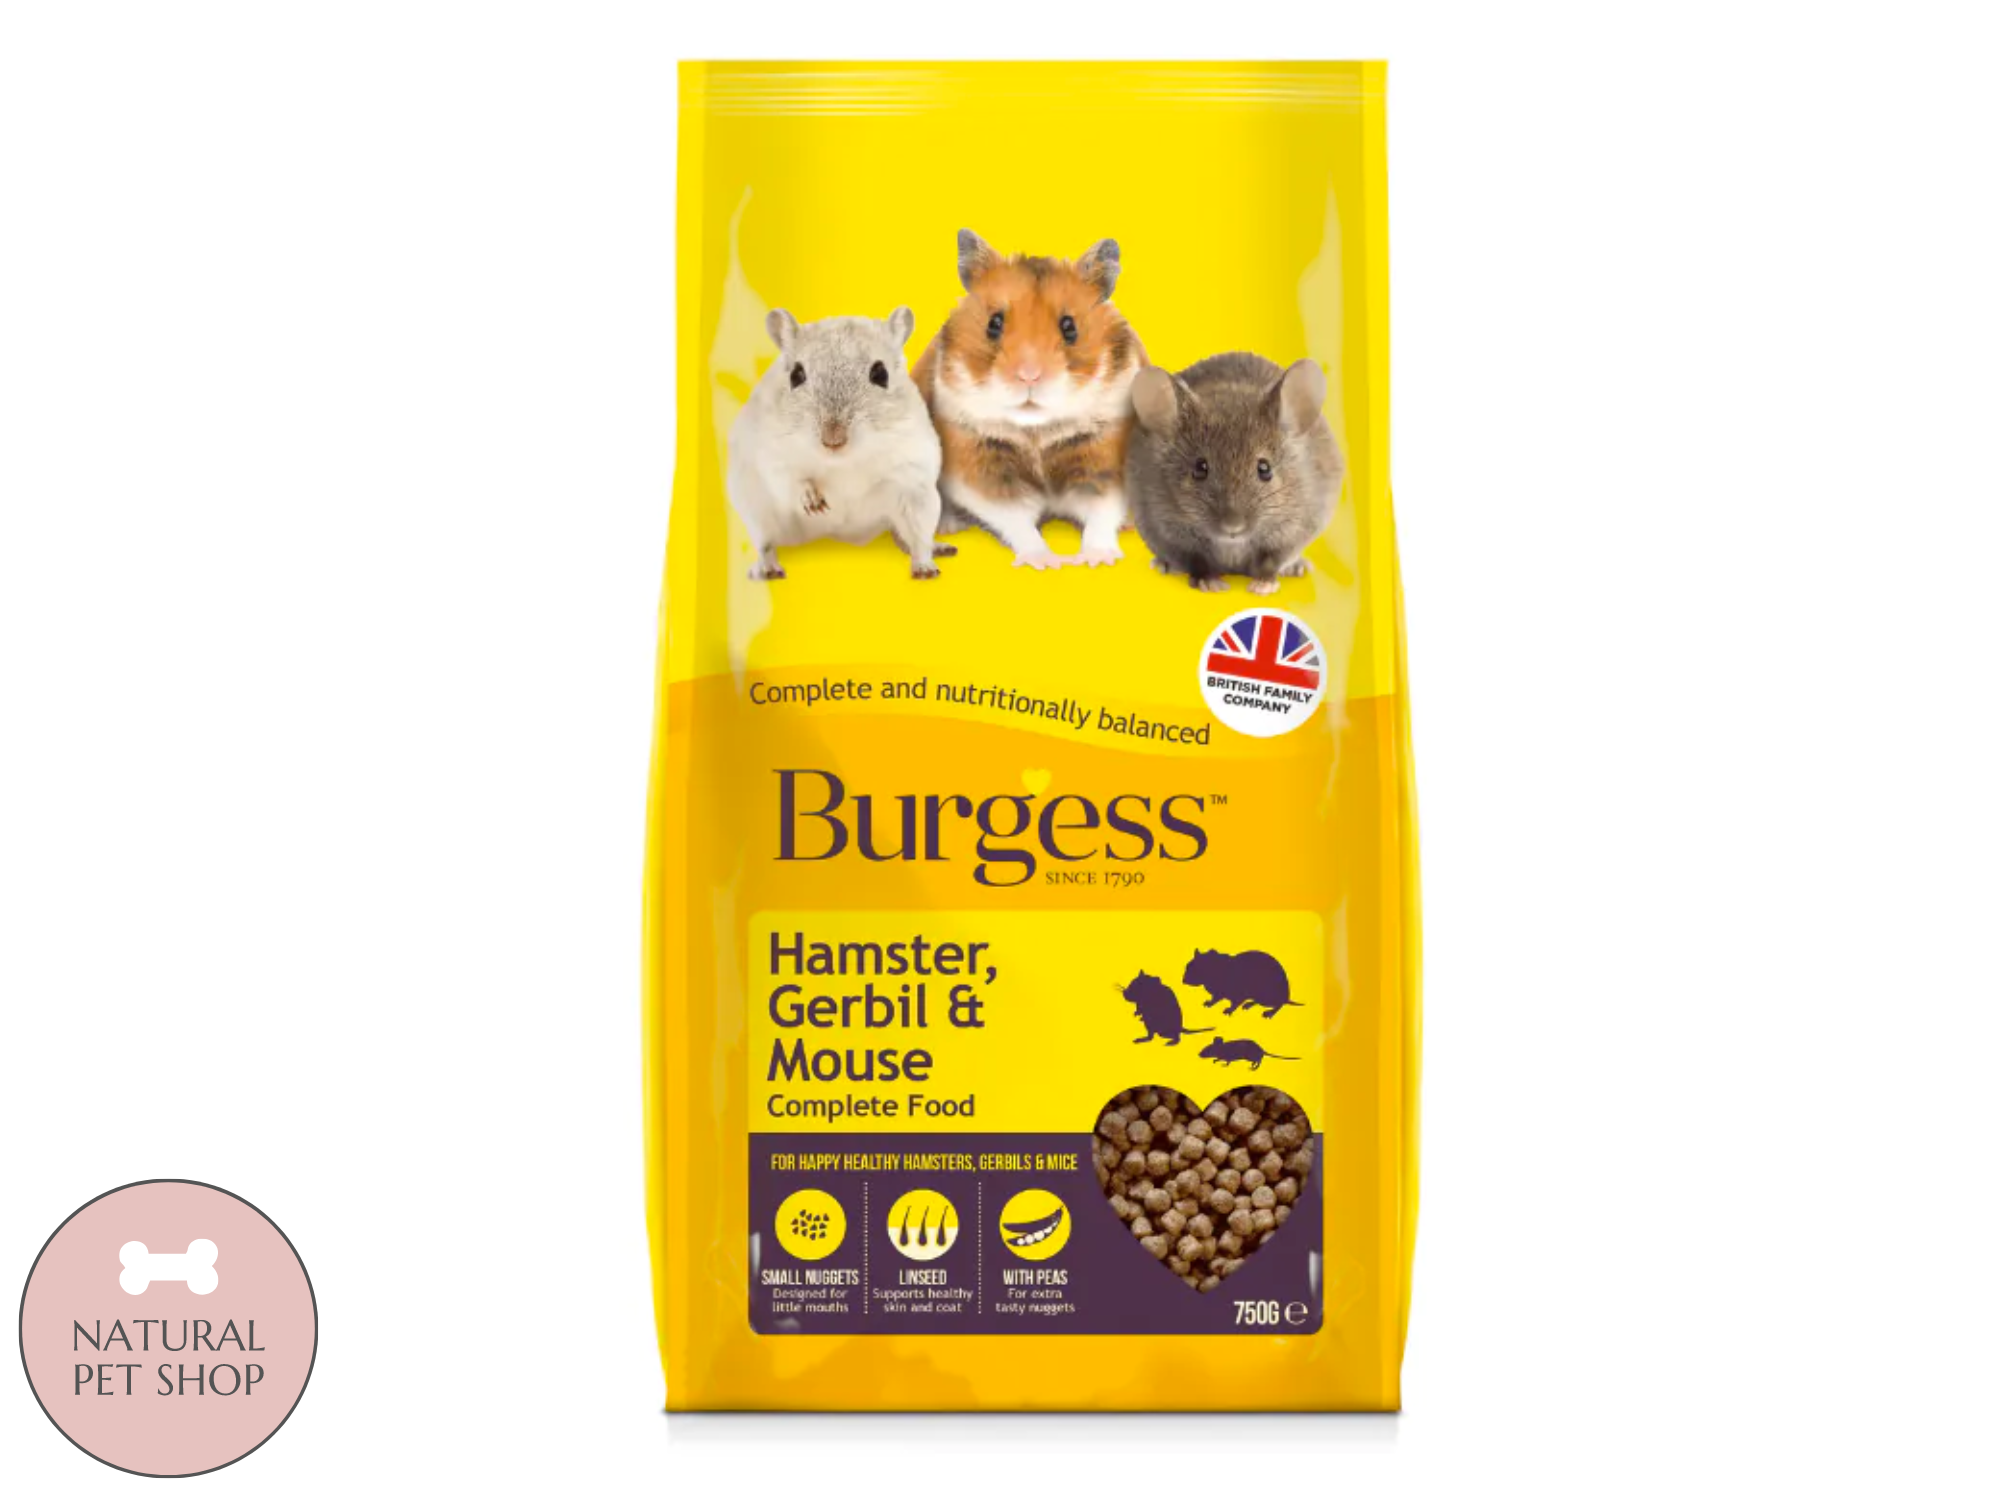 Burgess Hamster, Gerbil & Mouse Nuggets